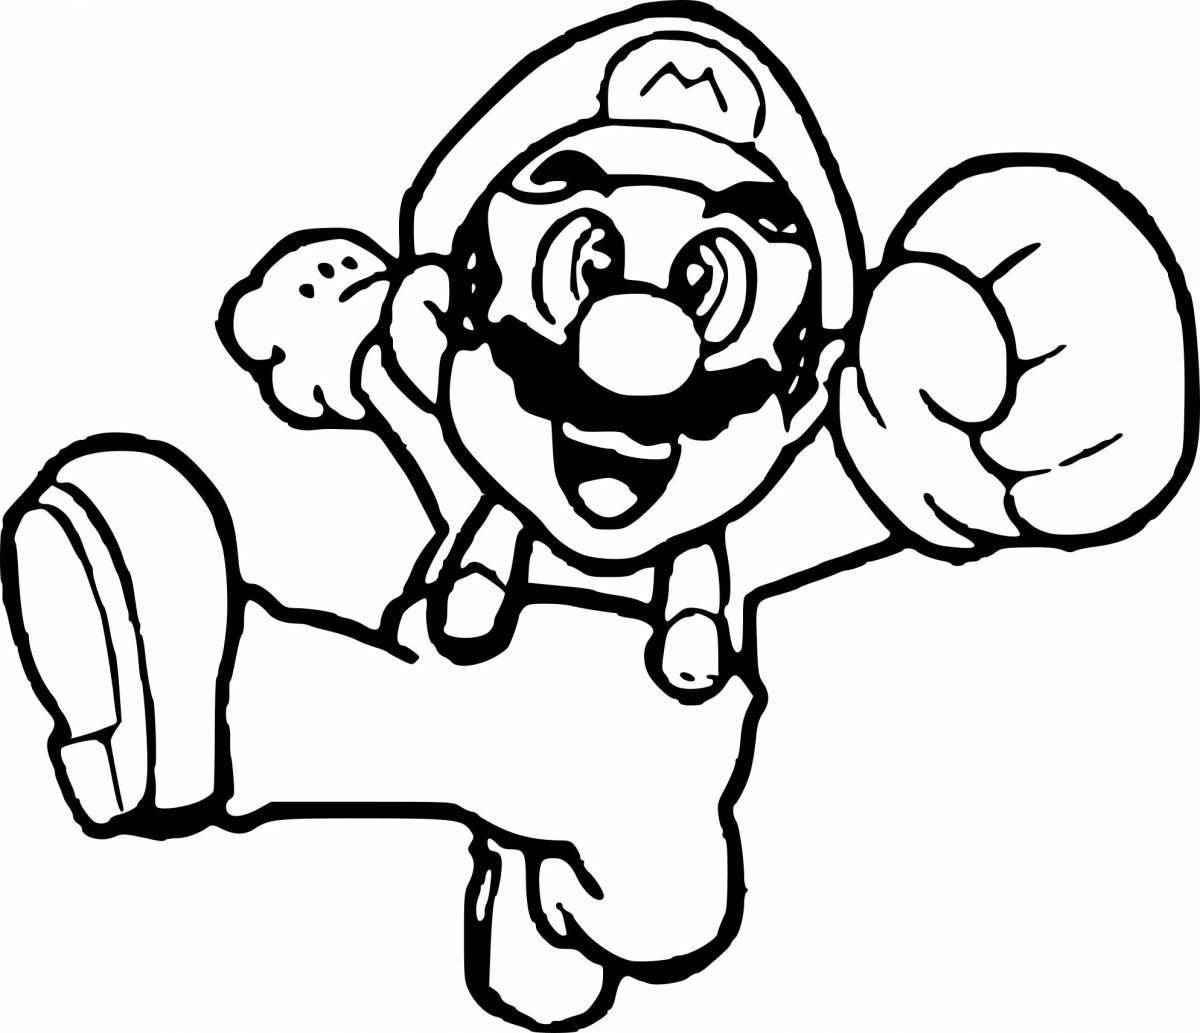 Mario funny coloring book for kids